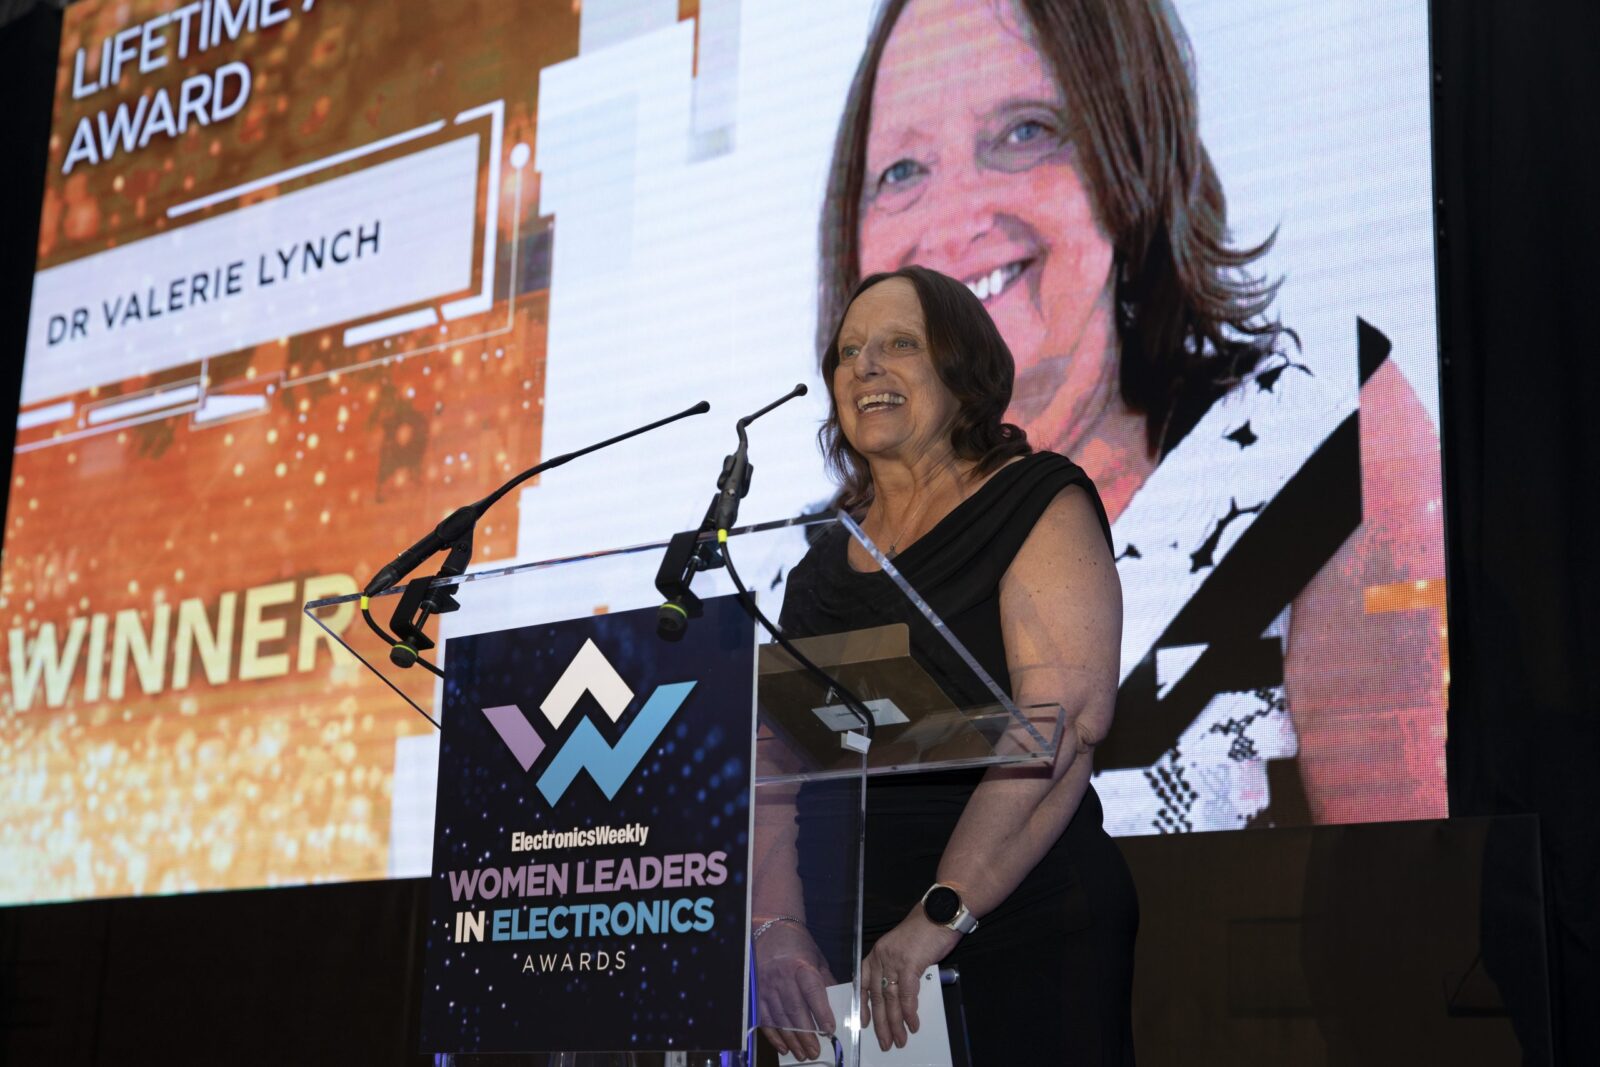 Dr Valerie Lynch awarded life-time achievement award for her contribution to electronics